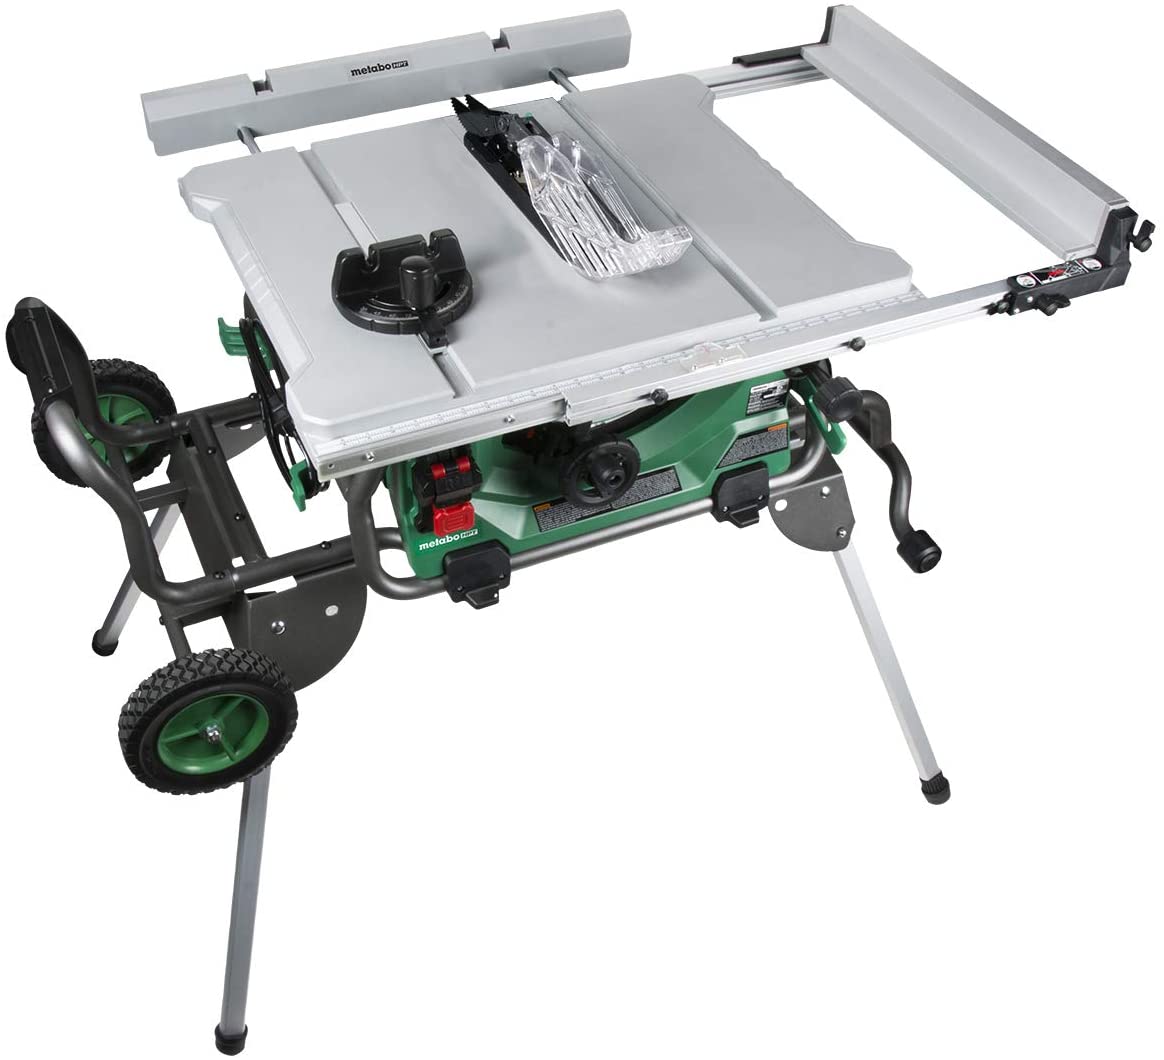 Metabo C10RJS - Best Table Saw in 2022: Portable, Hybrid, Cabinet, Contractor, mini, & Beginners Table Saws Reviews. - HandyMan.Guide - Table Saw